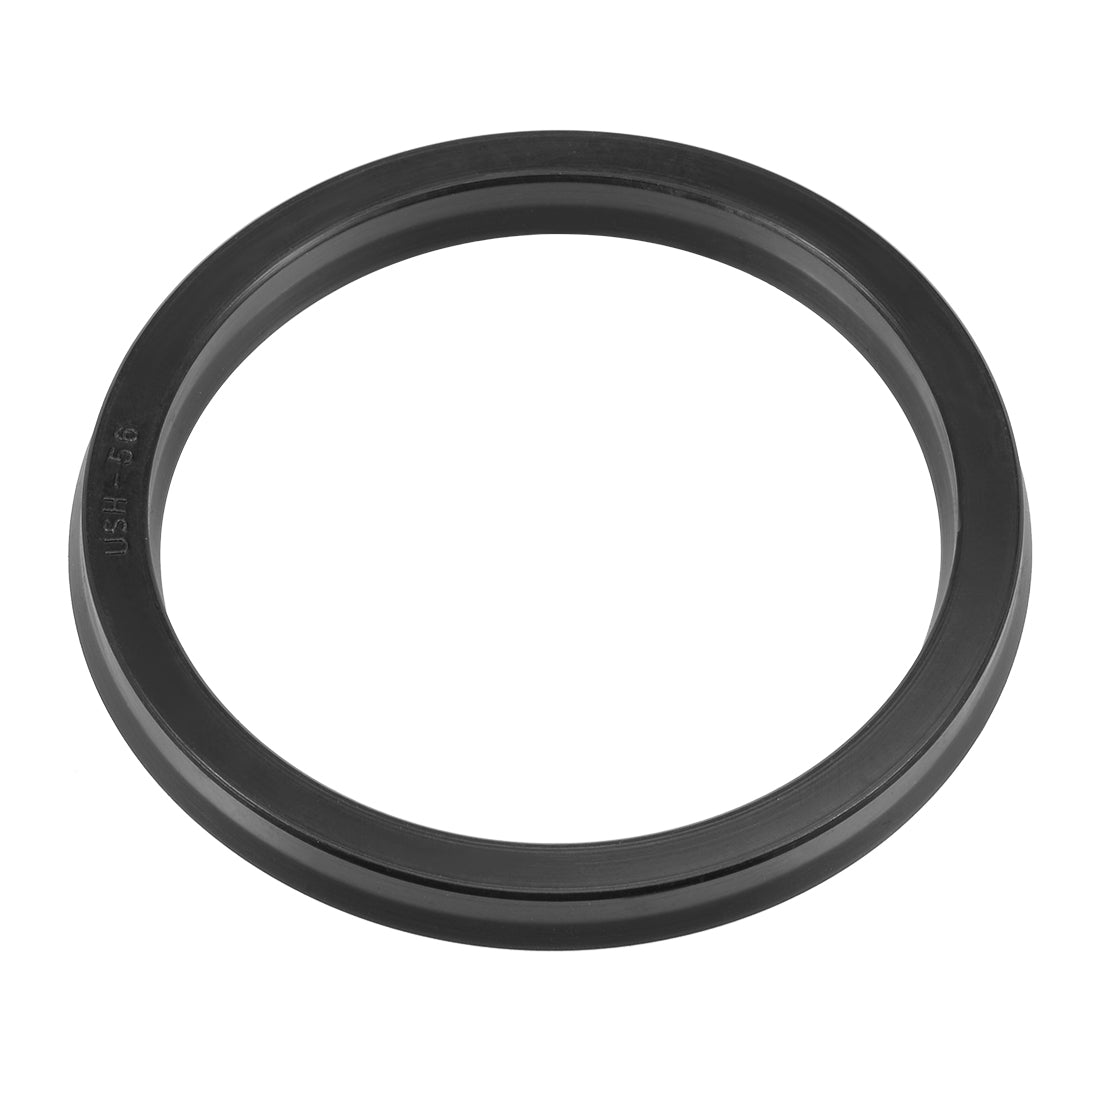 uxcell Uxcell Hydraulic Seal, Piston Shaft USH Oil Sealing O-Ring, 56mm x 66mm x 6mm